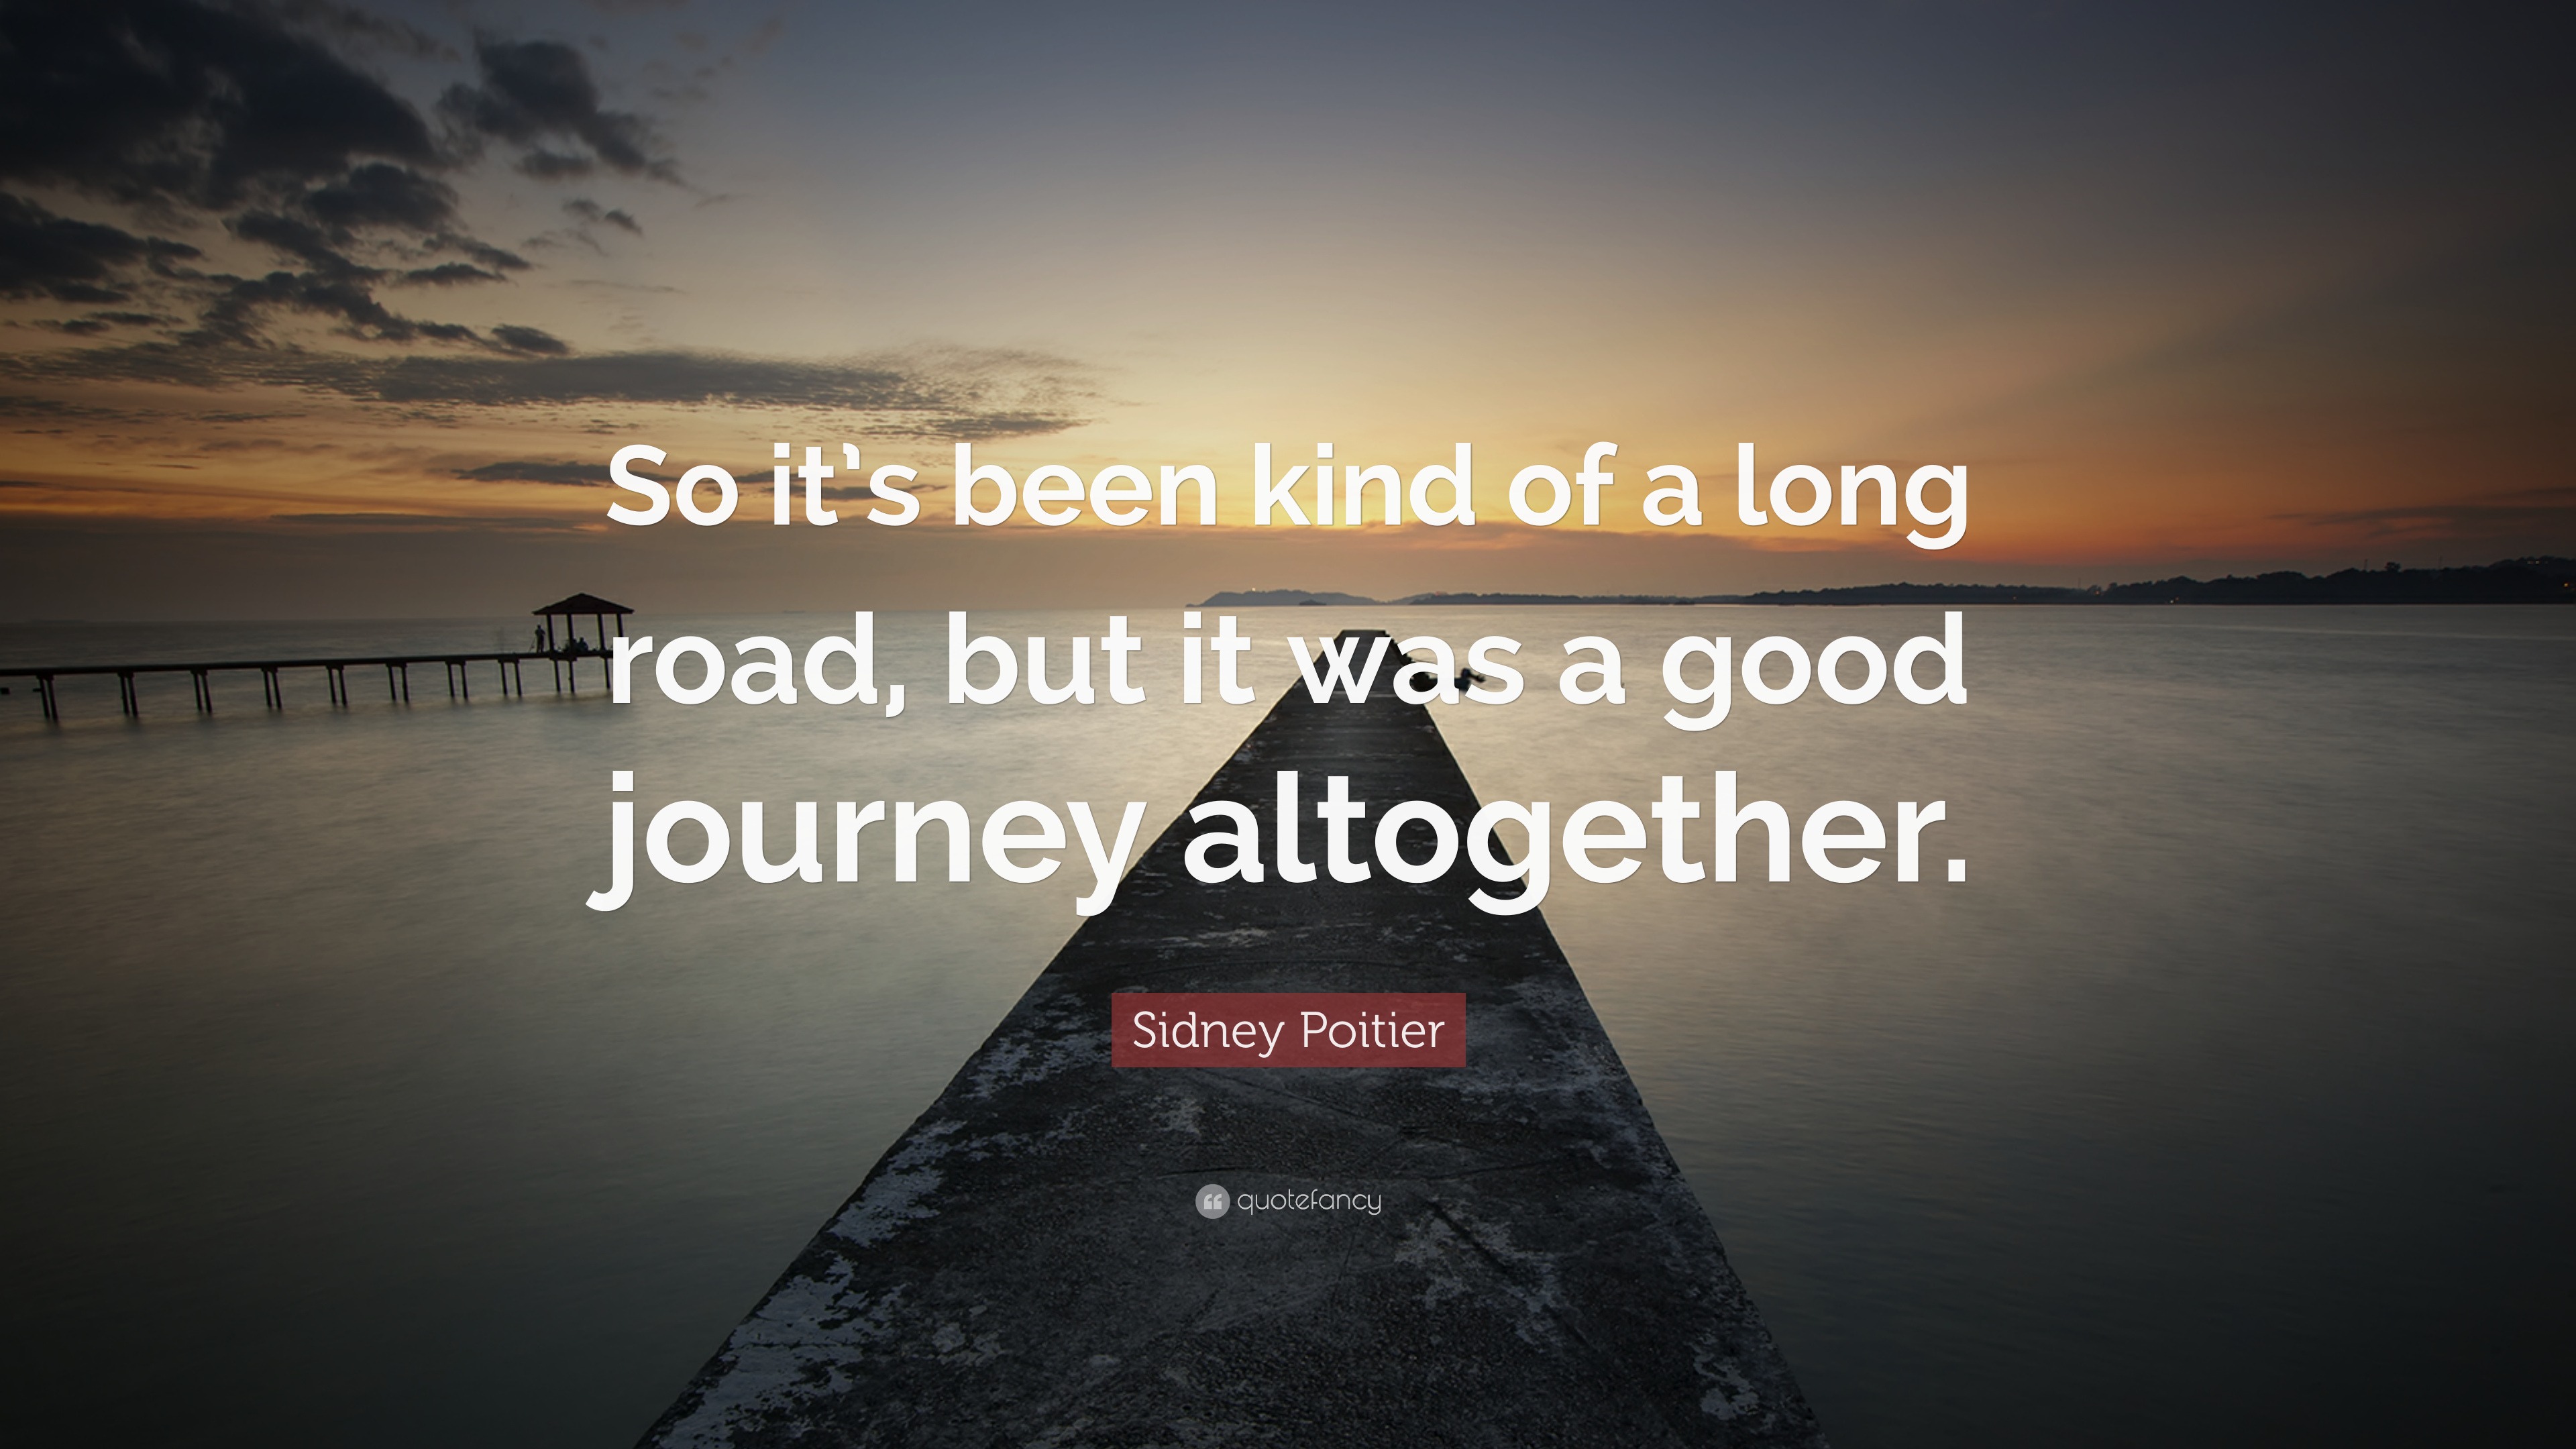 Sidney Poitier Quote: “So it's been kind of a long road, but it was a good